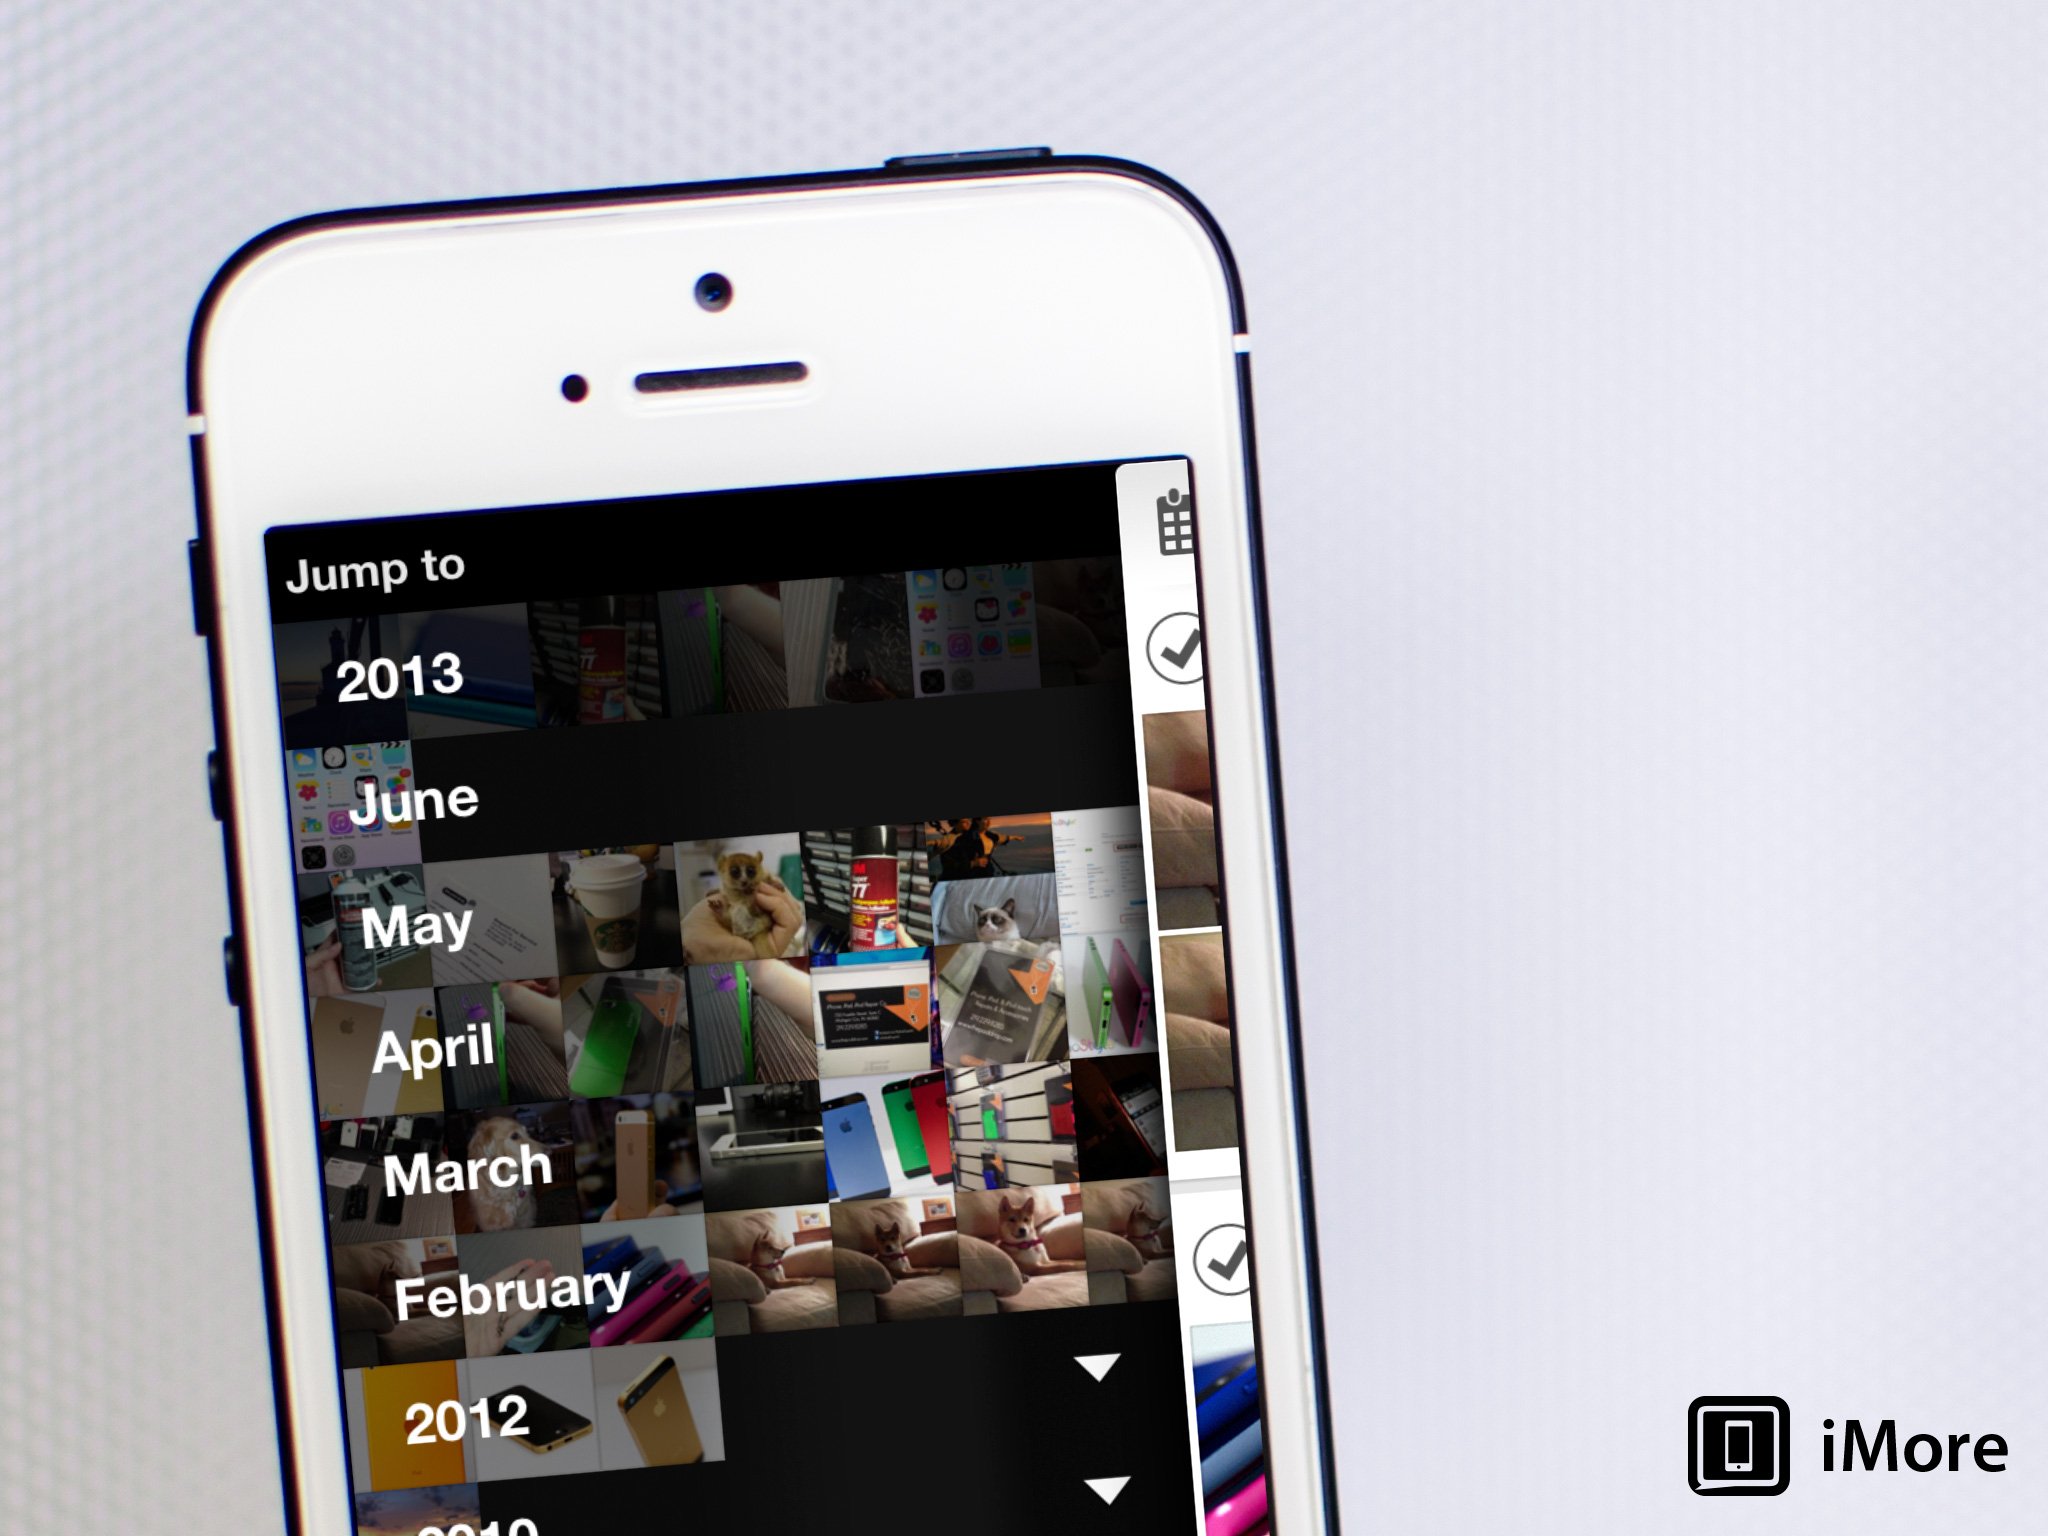 Photoful for iPhone review: iOS 7 like photo galleries, meme creation, and editing tools all in one